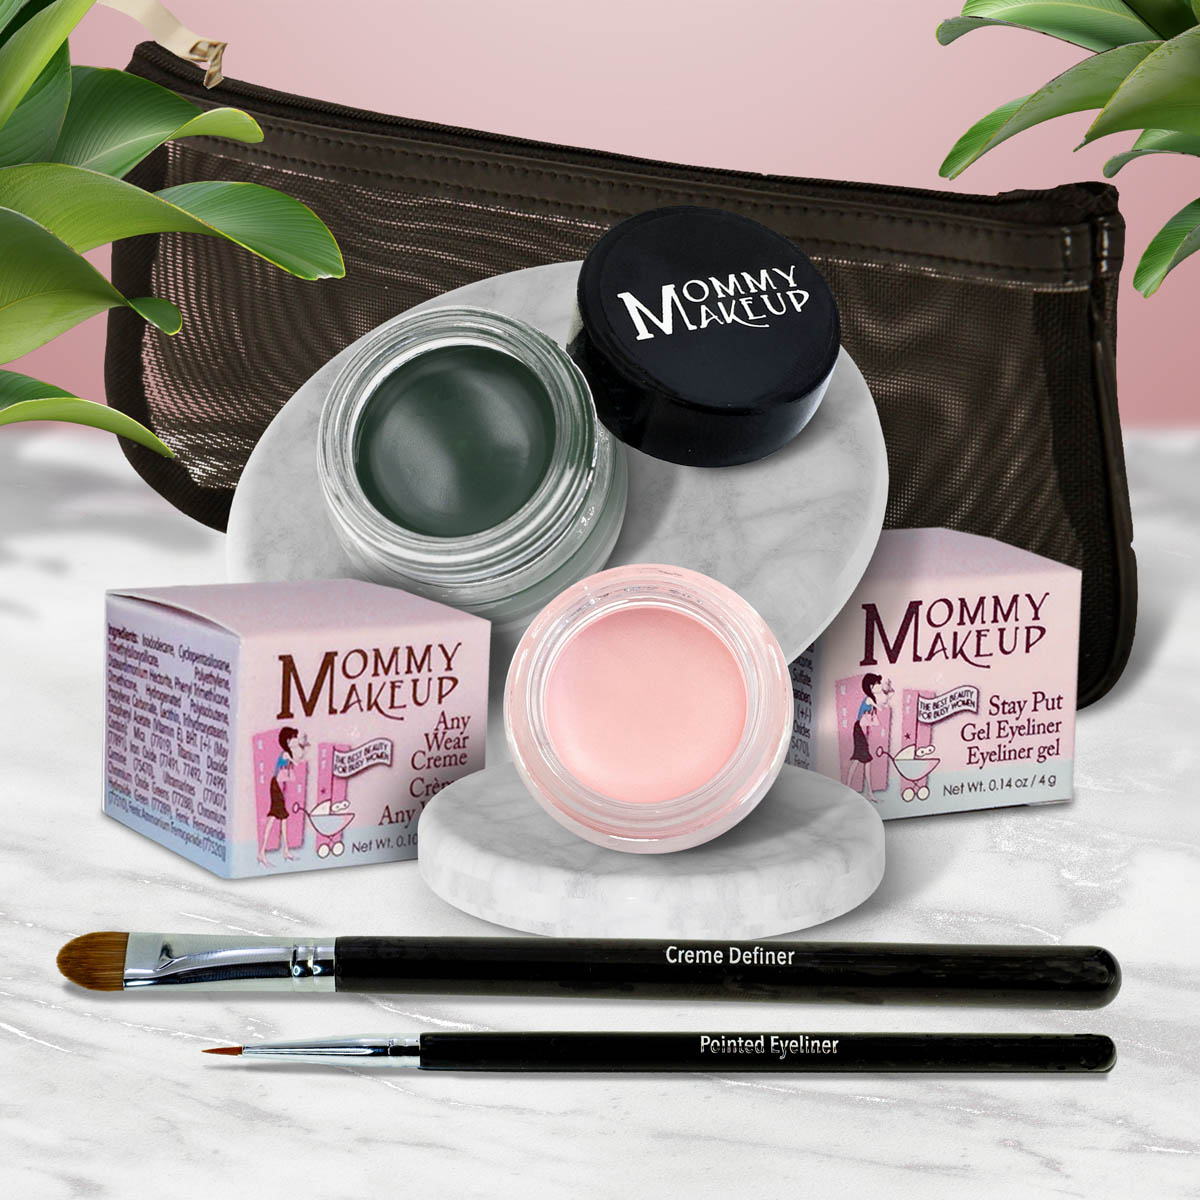 5 piece waterproof eye makeup set. Eyeliner, Eye shadow, brushes. Allergy tested, cruelty free. Made in USA. Cameo - a light nude pink and Hunter - A Rich Hunter/Forest Green